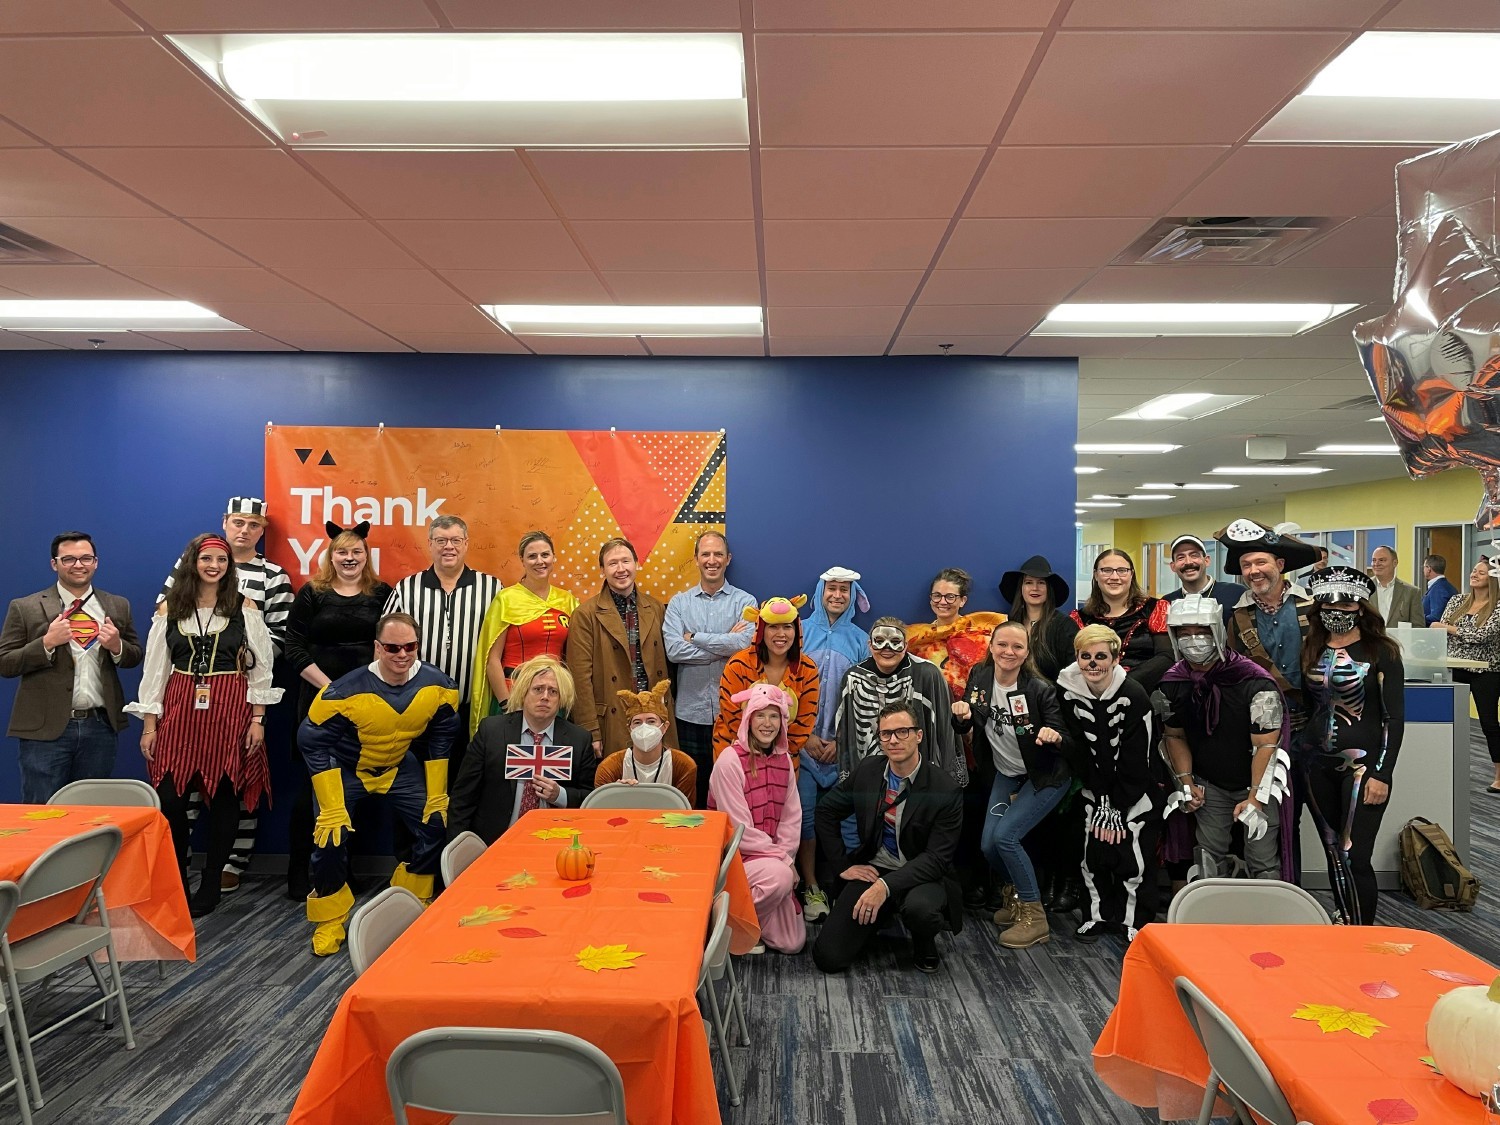 Annual Halloween costume contest celebration at our HQ office in RTP, NC